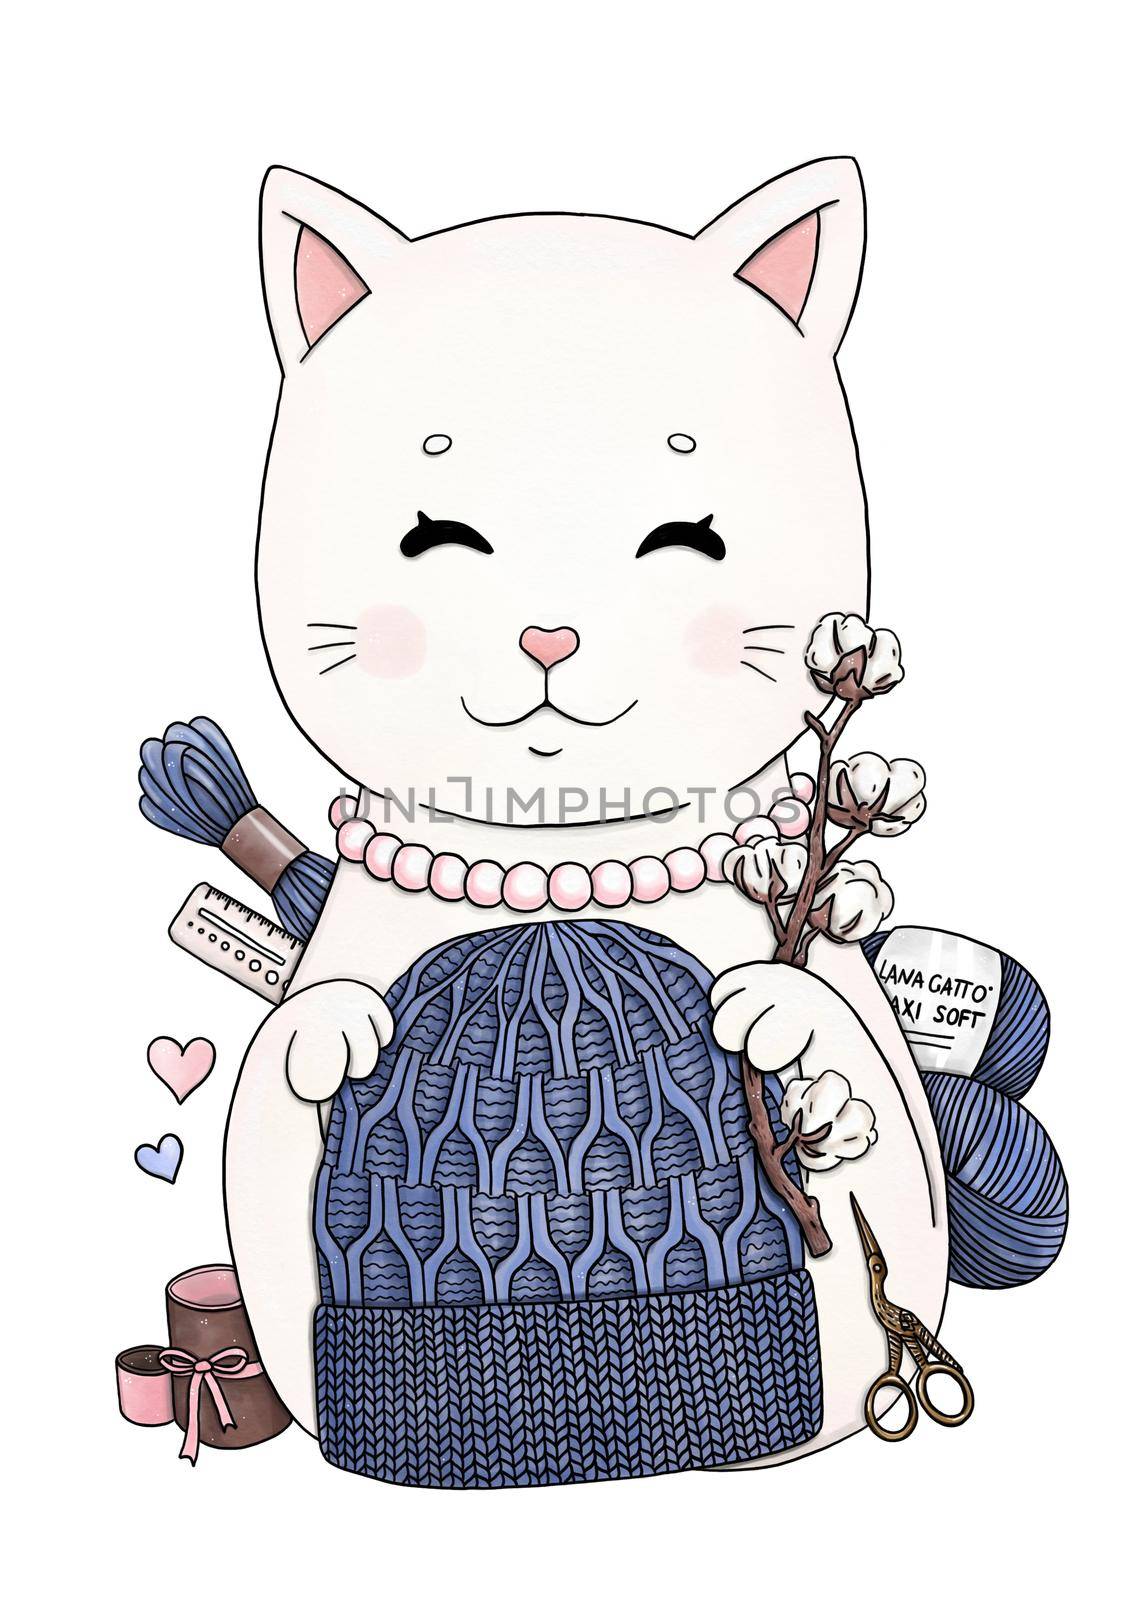 Knitting cat with knitted accessories and yarn balls. High quality illustration